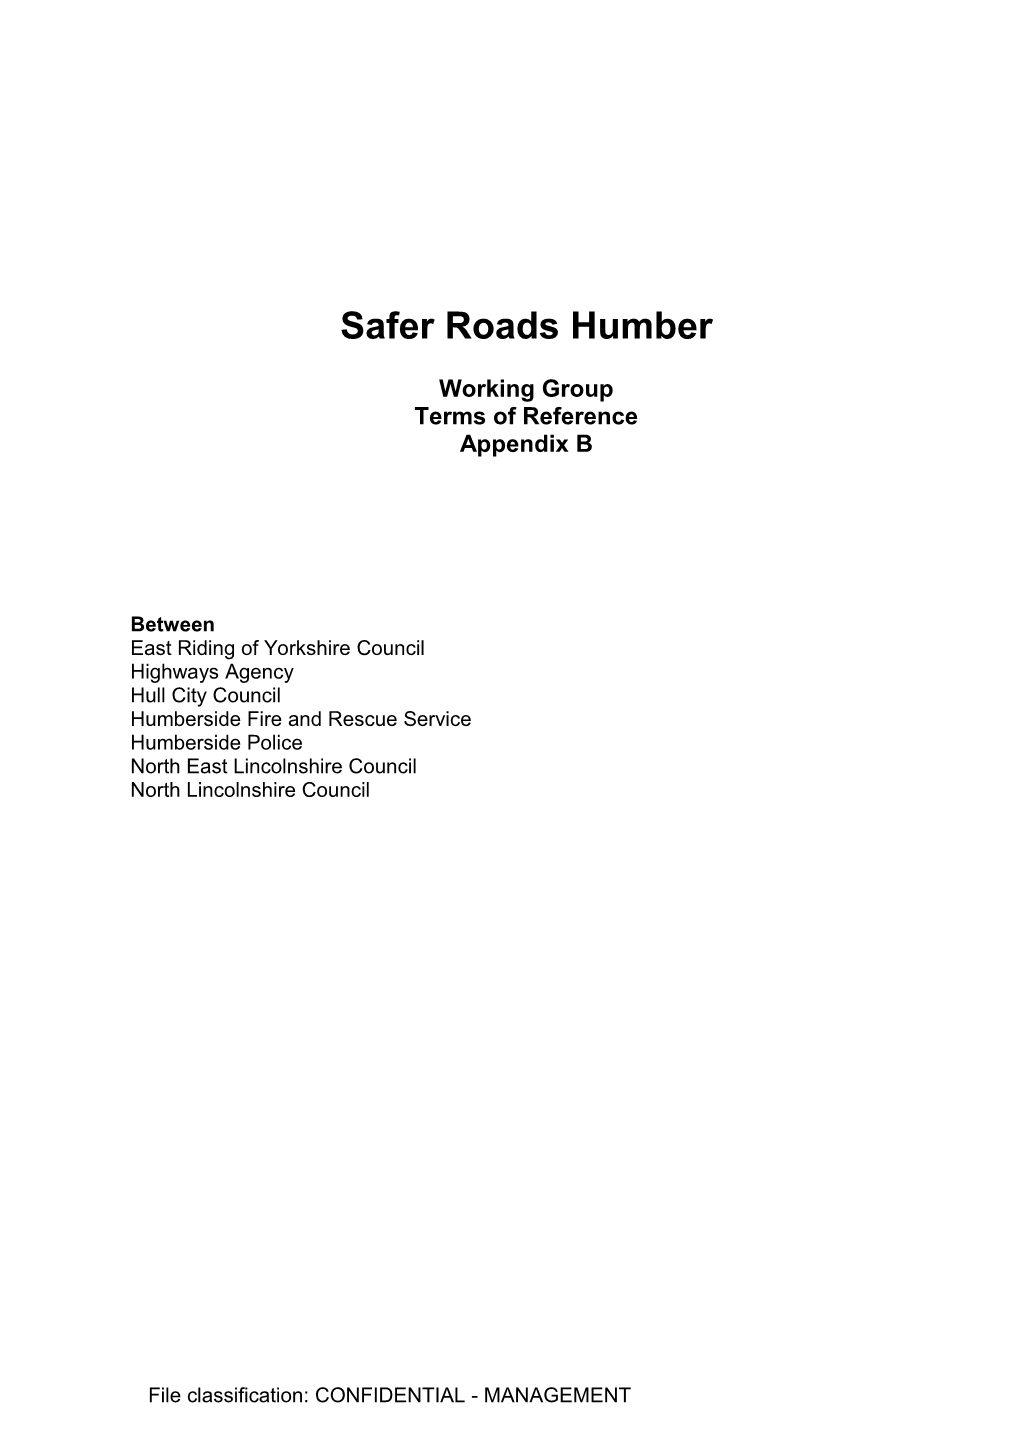 Safer Roads-Humber Working Group